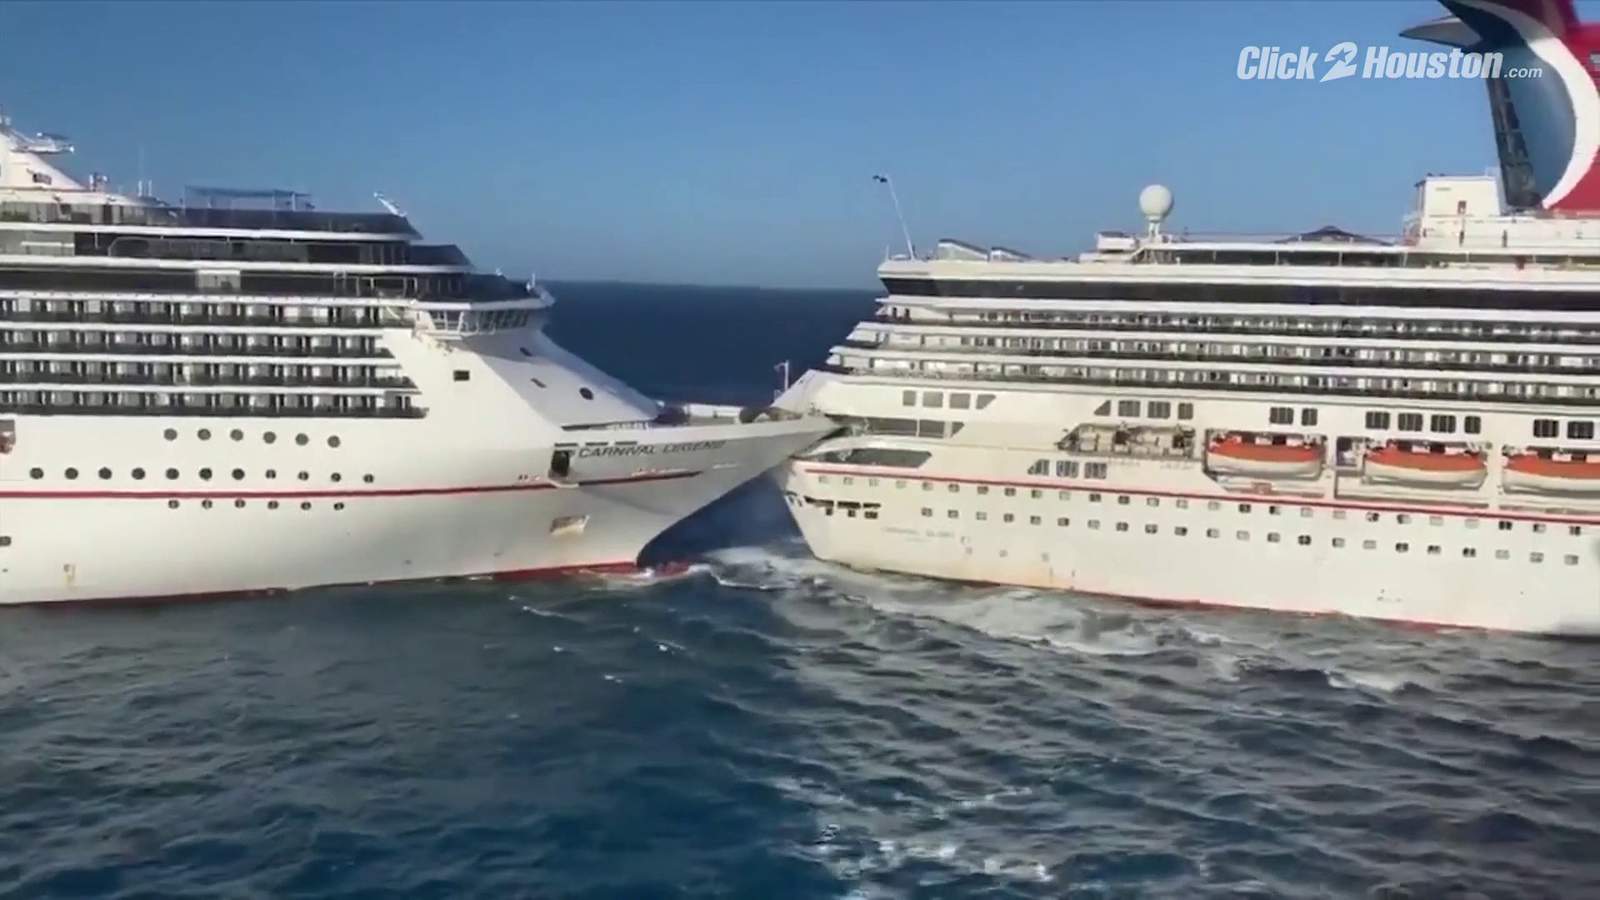 Two Carnival cruise ships collided in Cozumel, Mexico